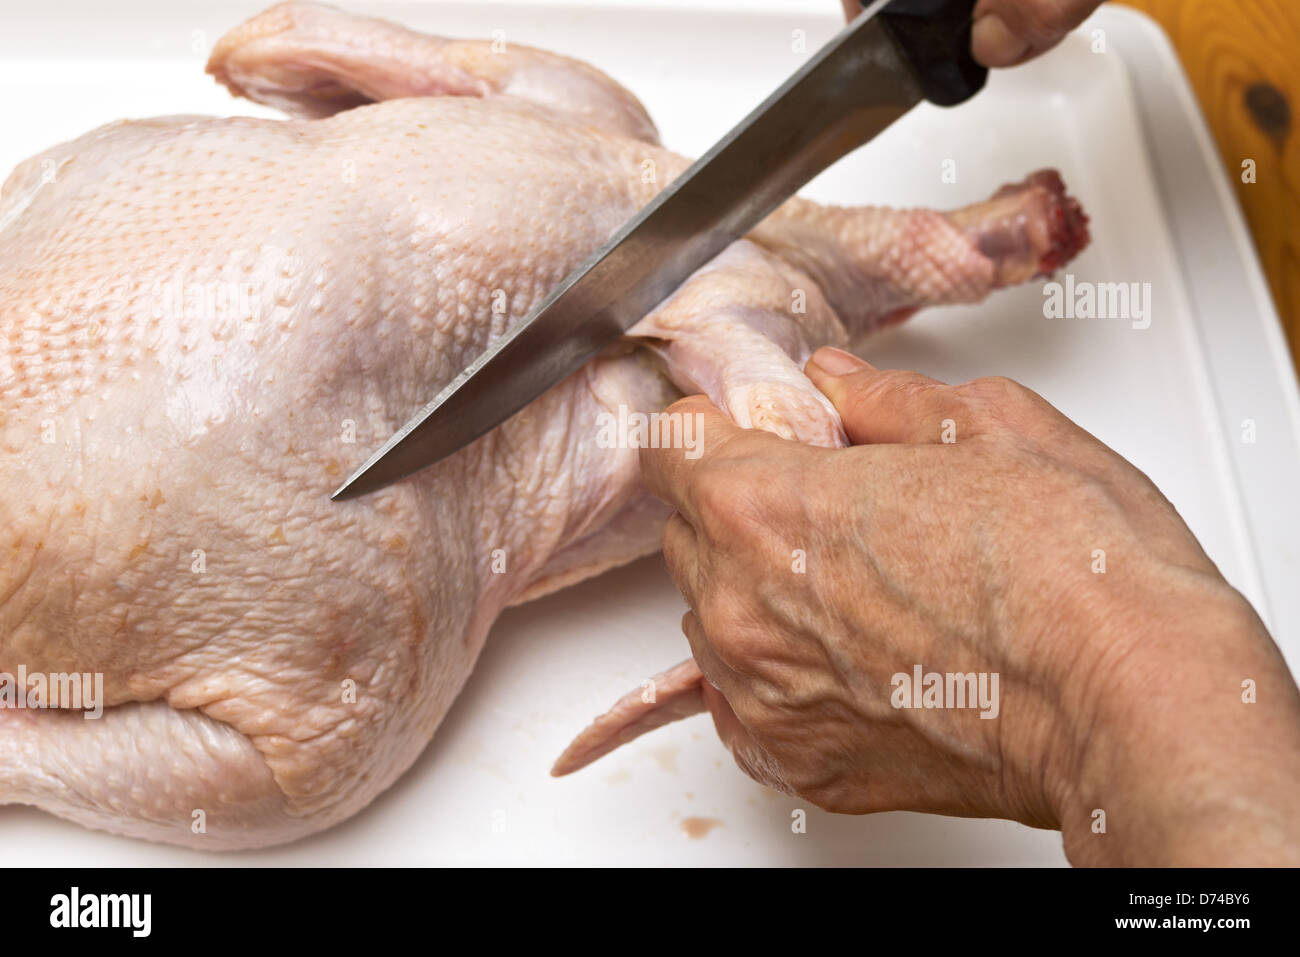 Hand with knife cutting chicken meat Stock Photo